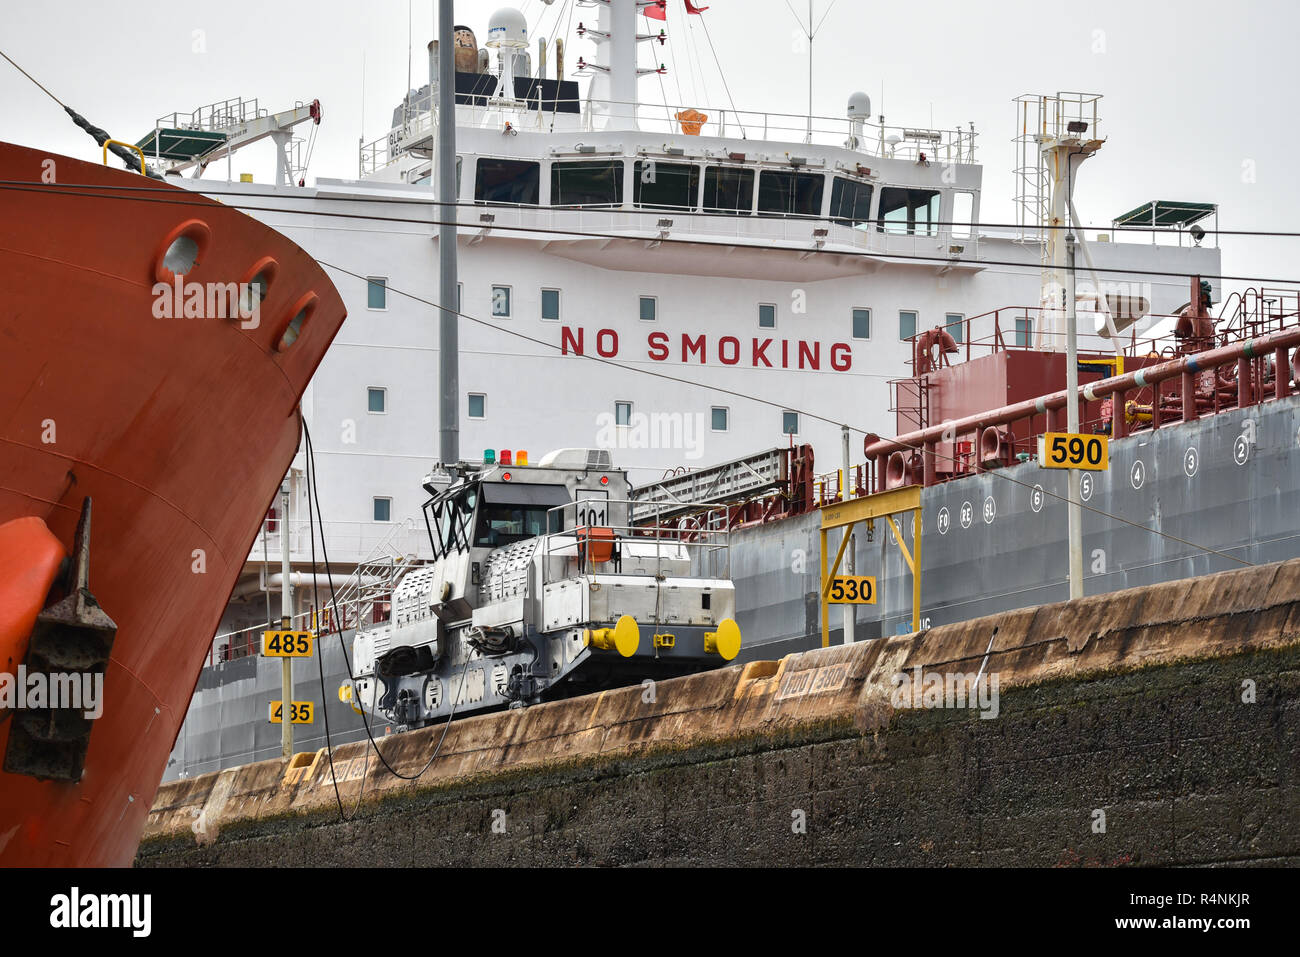 Hazardous habit, Big painted red letter sign on the bridge of a large ocean going ship tells the crew No Smoking. Stock Photo